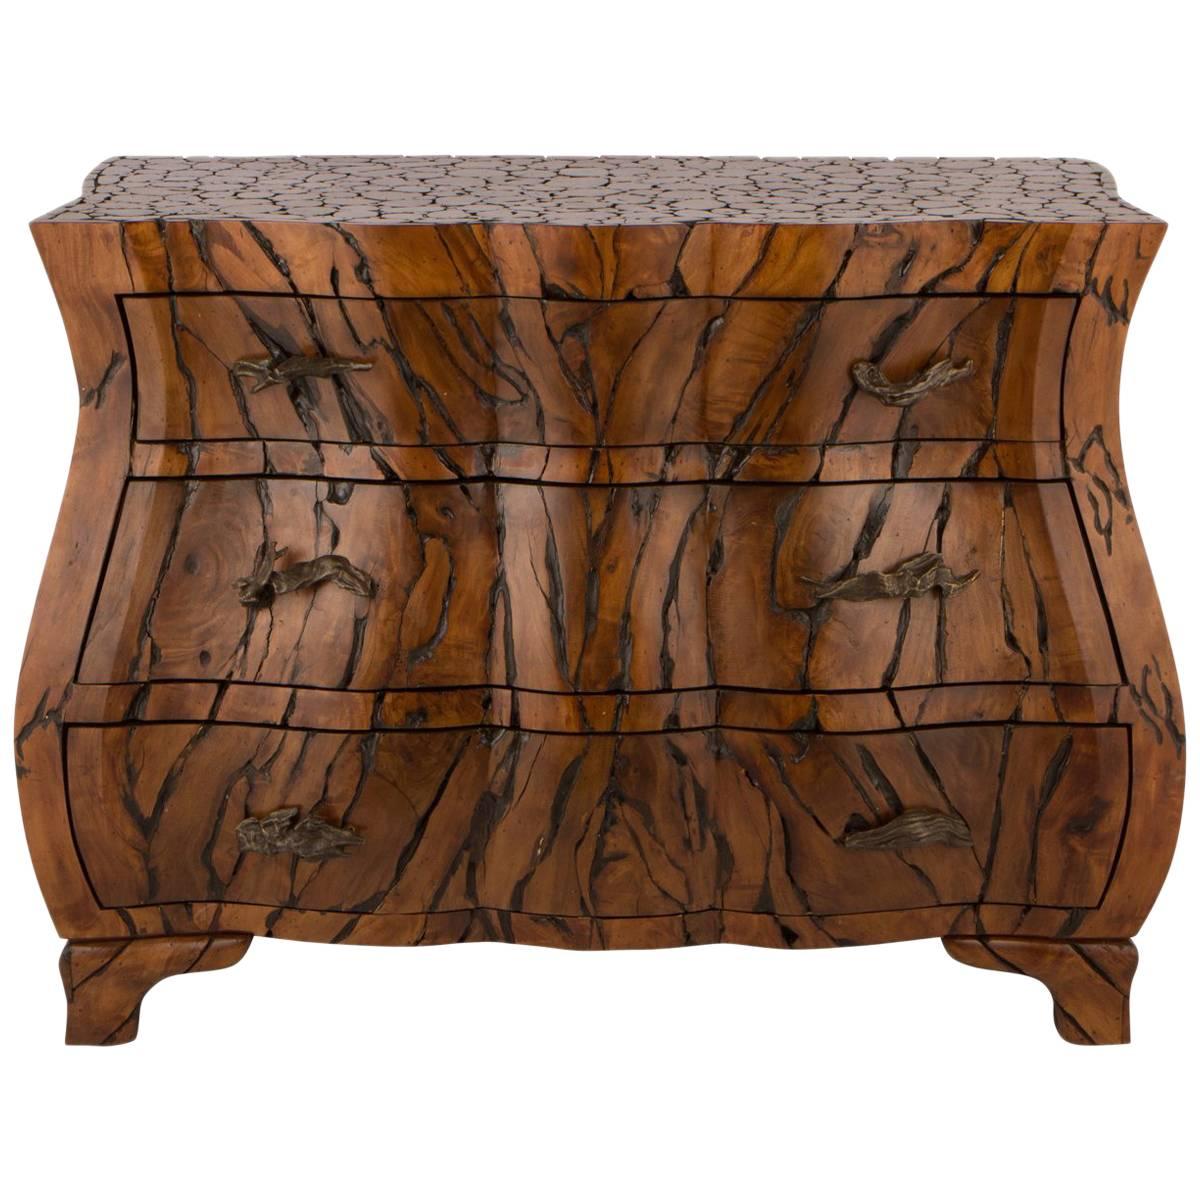 Spectacular Burl Wood Chest by Maitland Smith